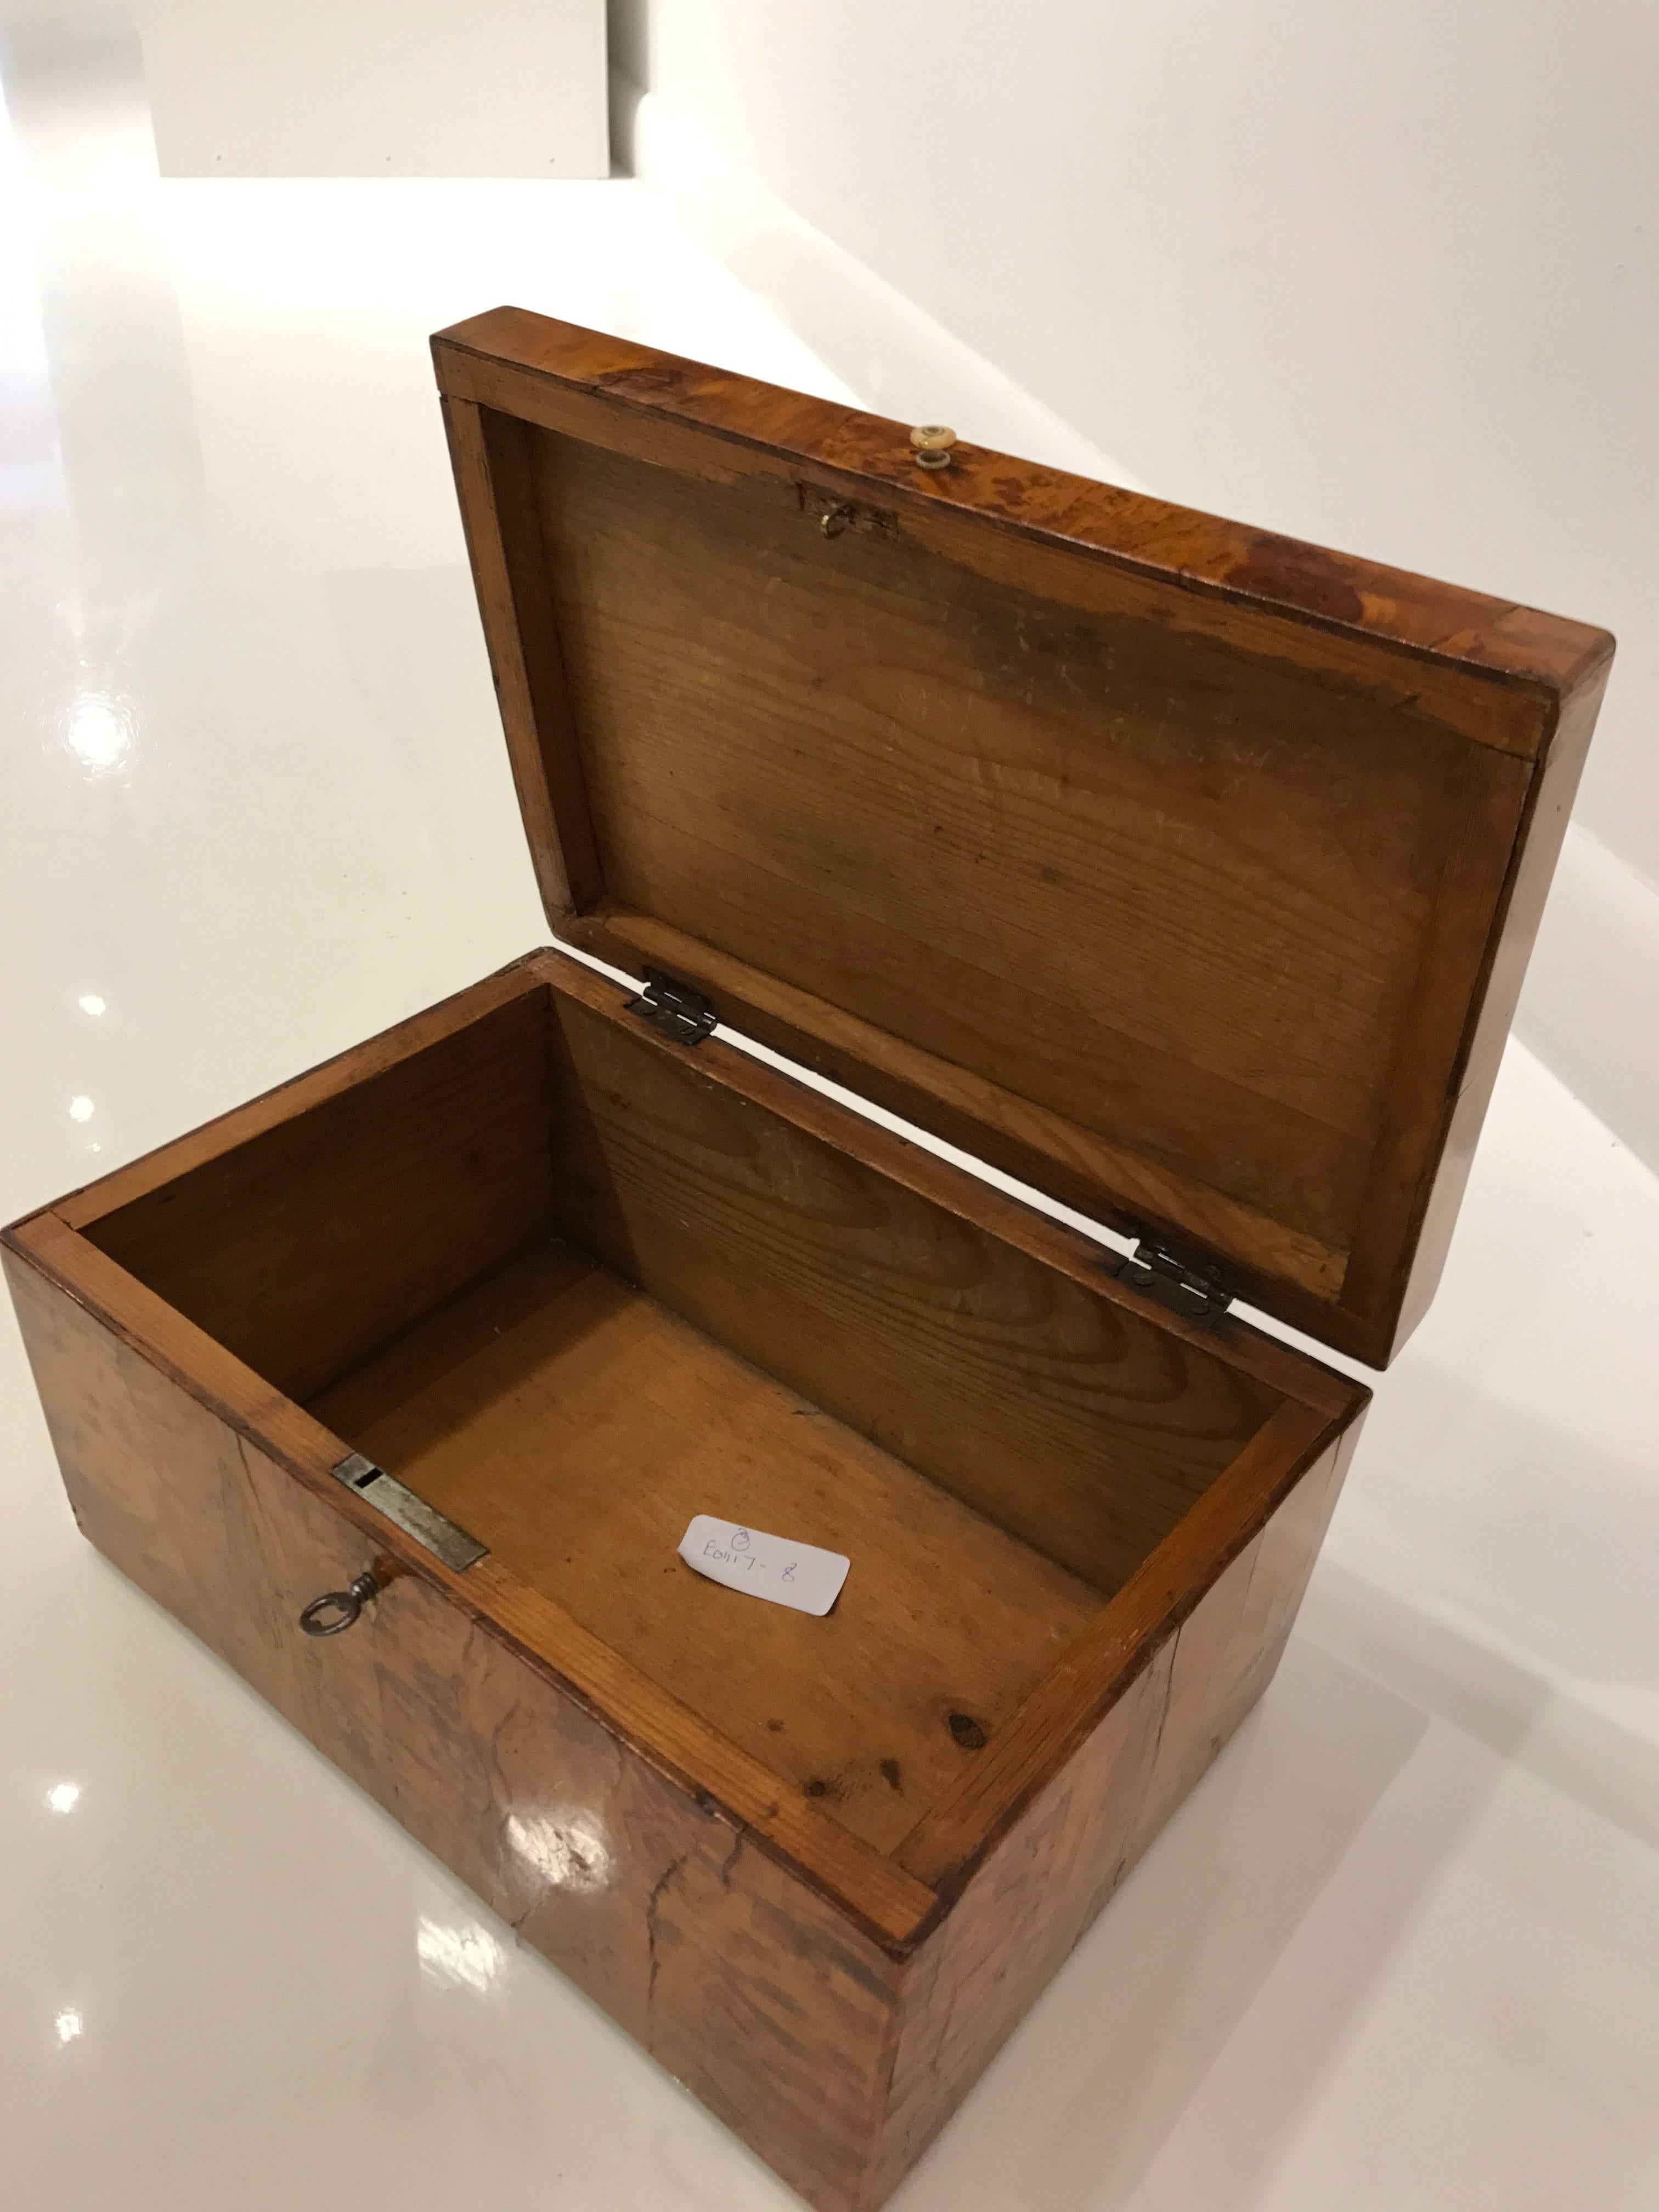 Three Swedish birch and alder root boxes, 19th century.

Measure: Large box 10 3/4in x 7in x 5 1/2in high
Medium box with drawer 7in high x 5 3/4in wide x 4 3/4in deep
Small box 5in wide x 3 1/2in deep x 2 1/2in high

Large box list price